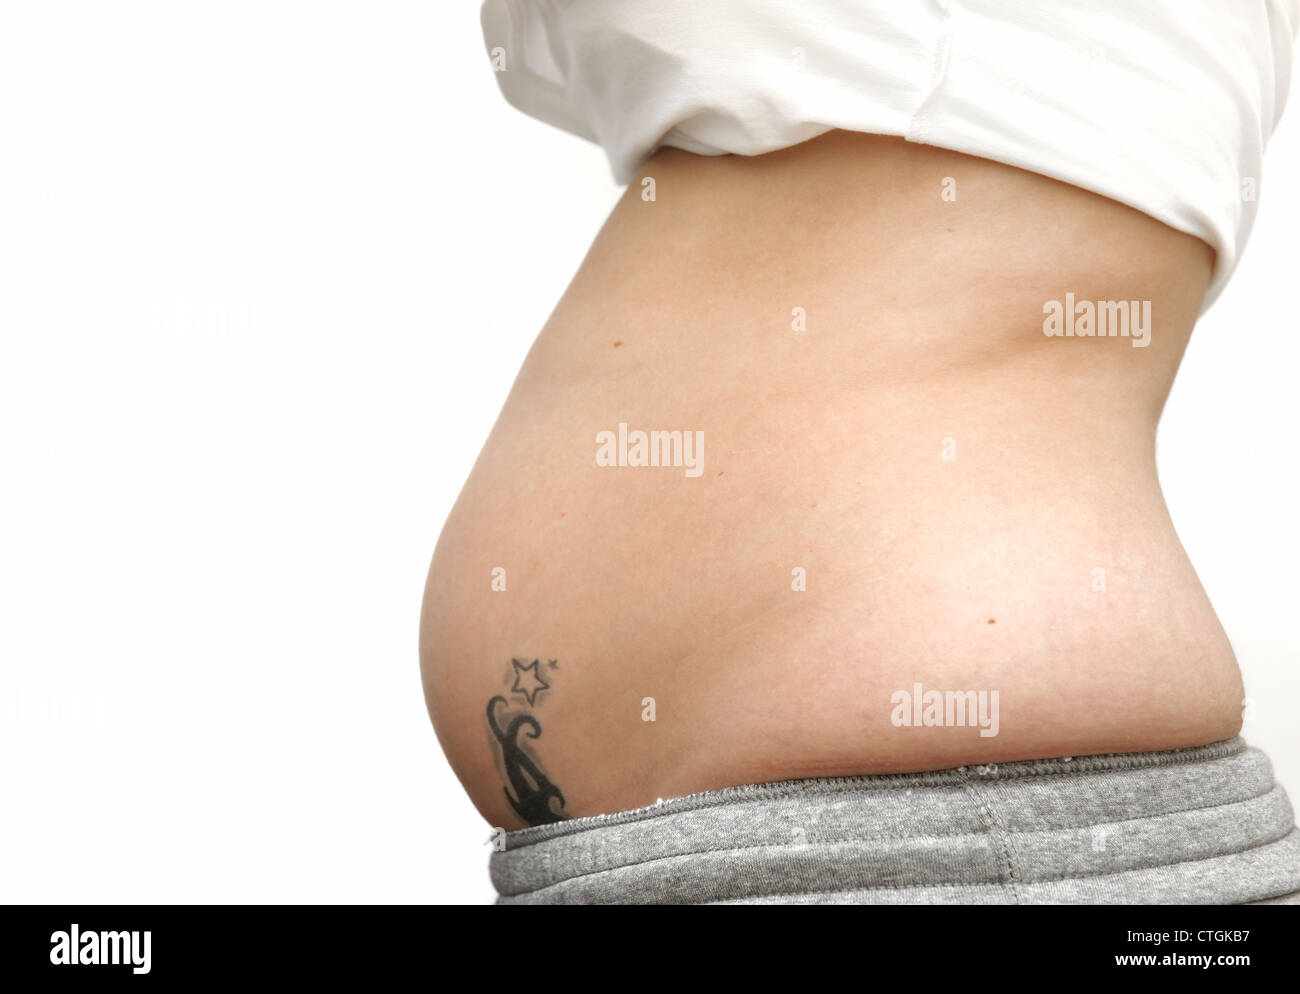 23 year old female 17 weeks pregnant Stock Photo